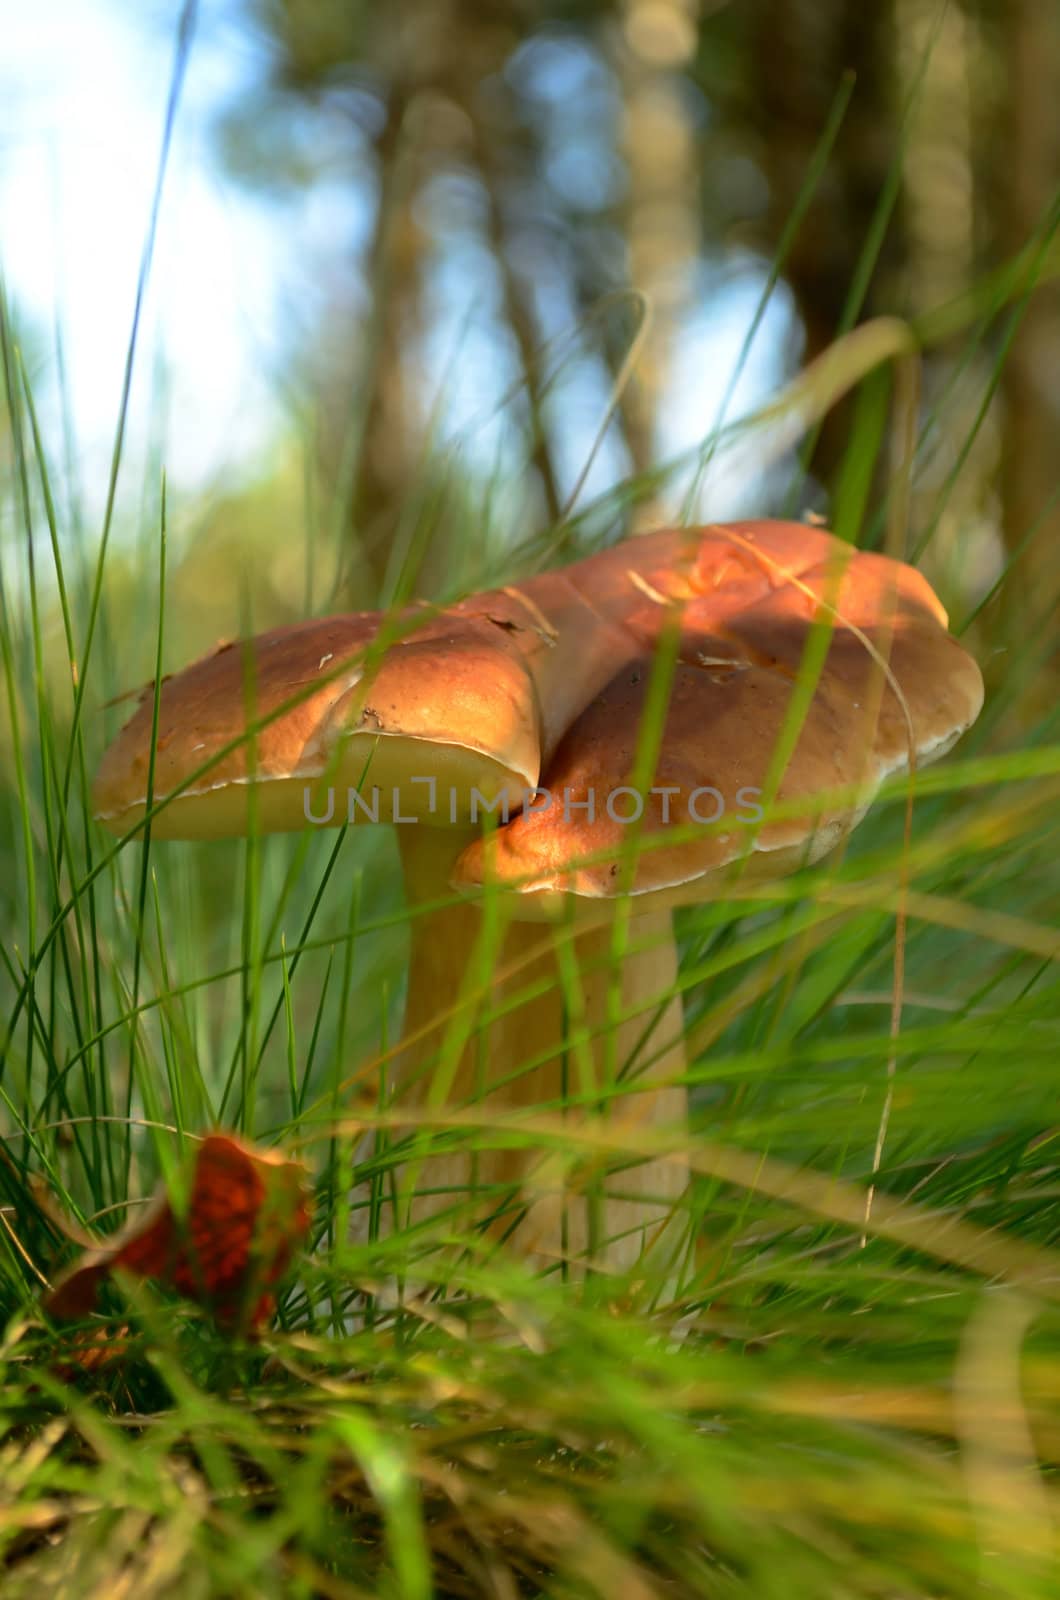  Edible mushroom in the grass at the edge of the forest